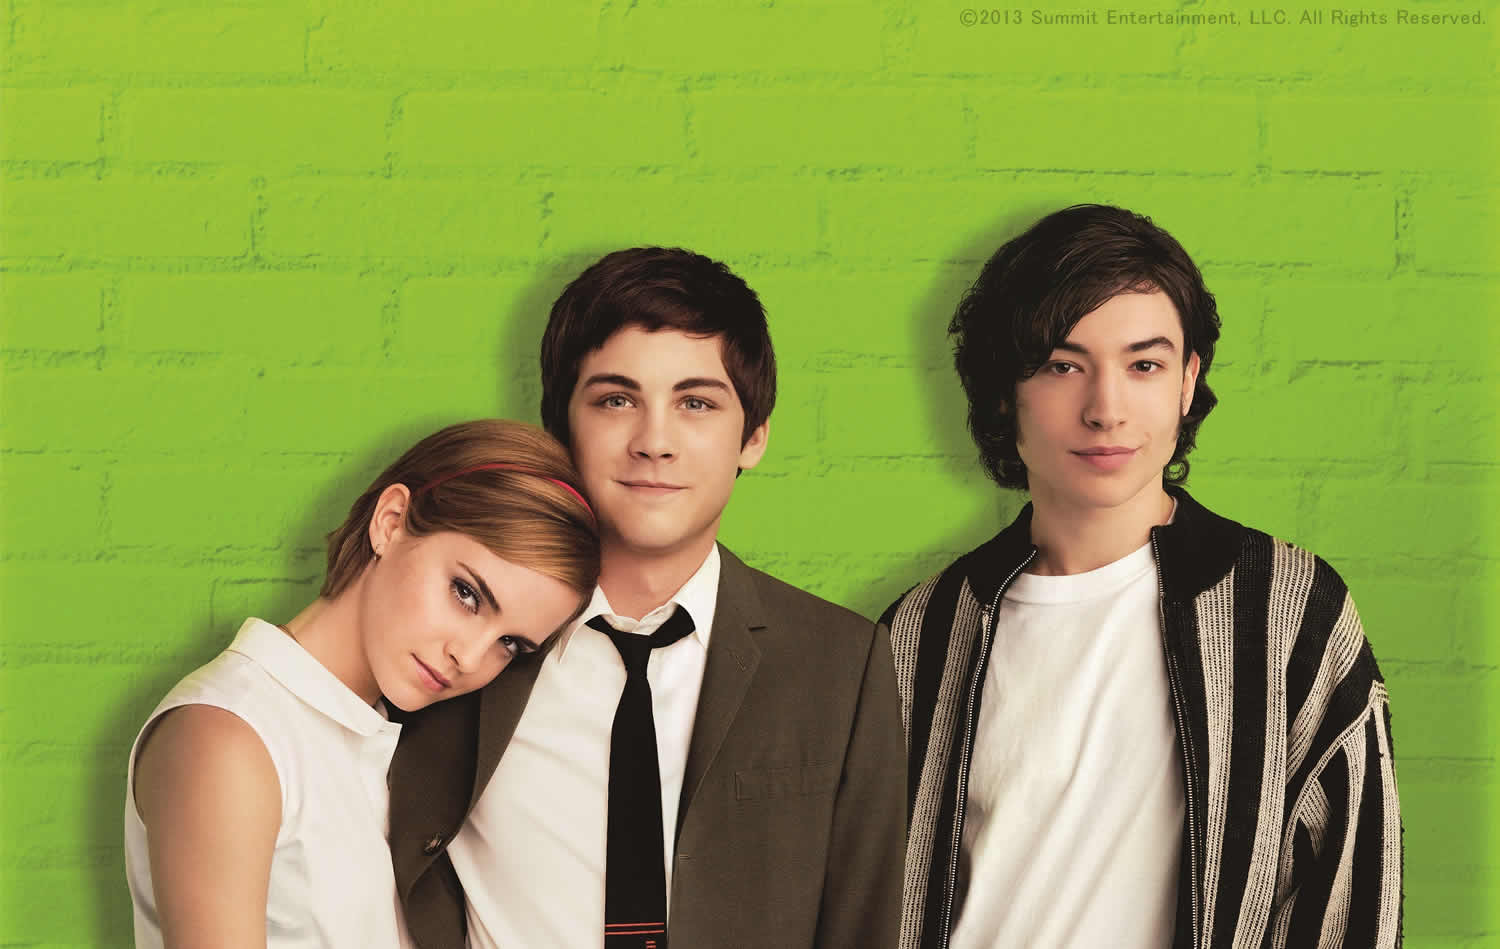 EH[t[/The Perks of Being a Wallflower